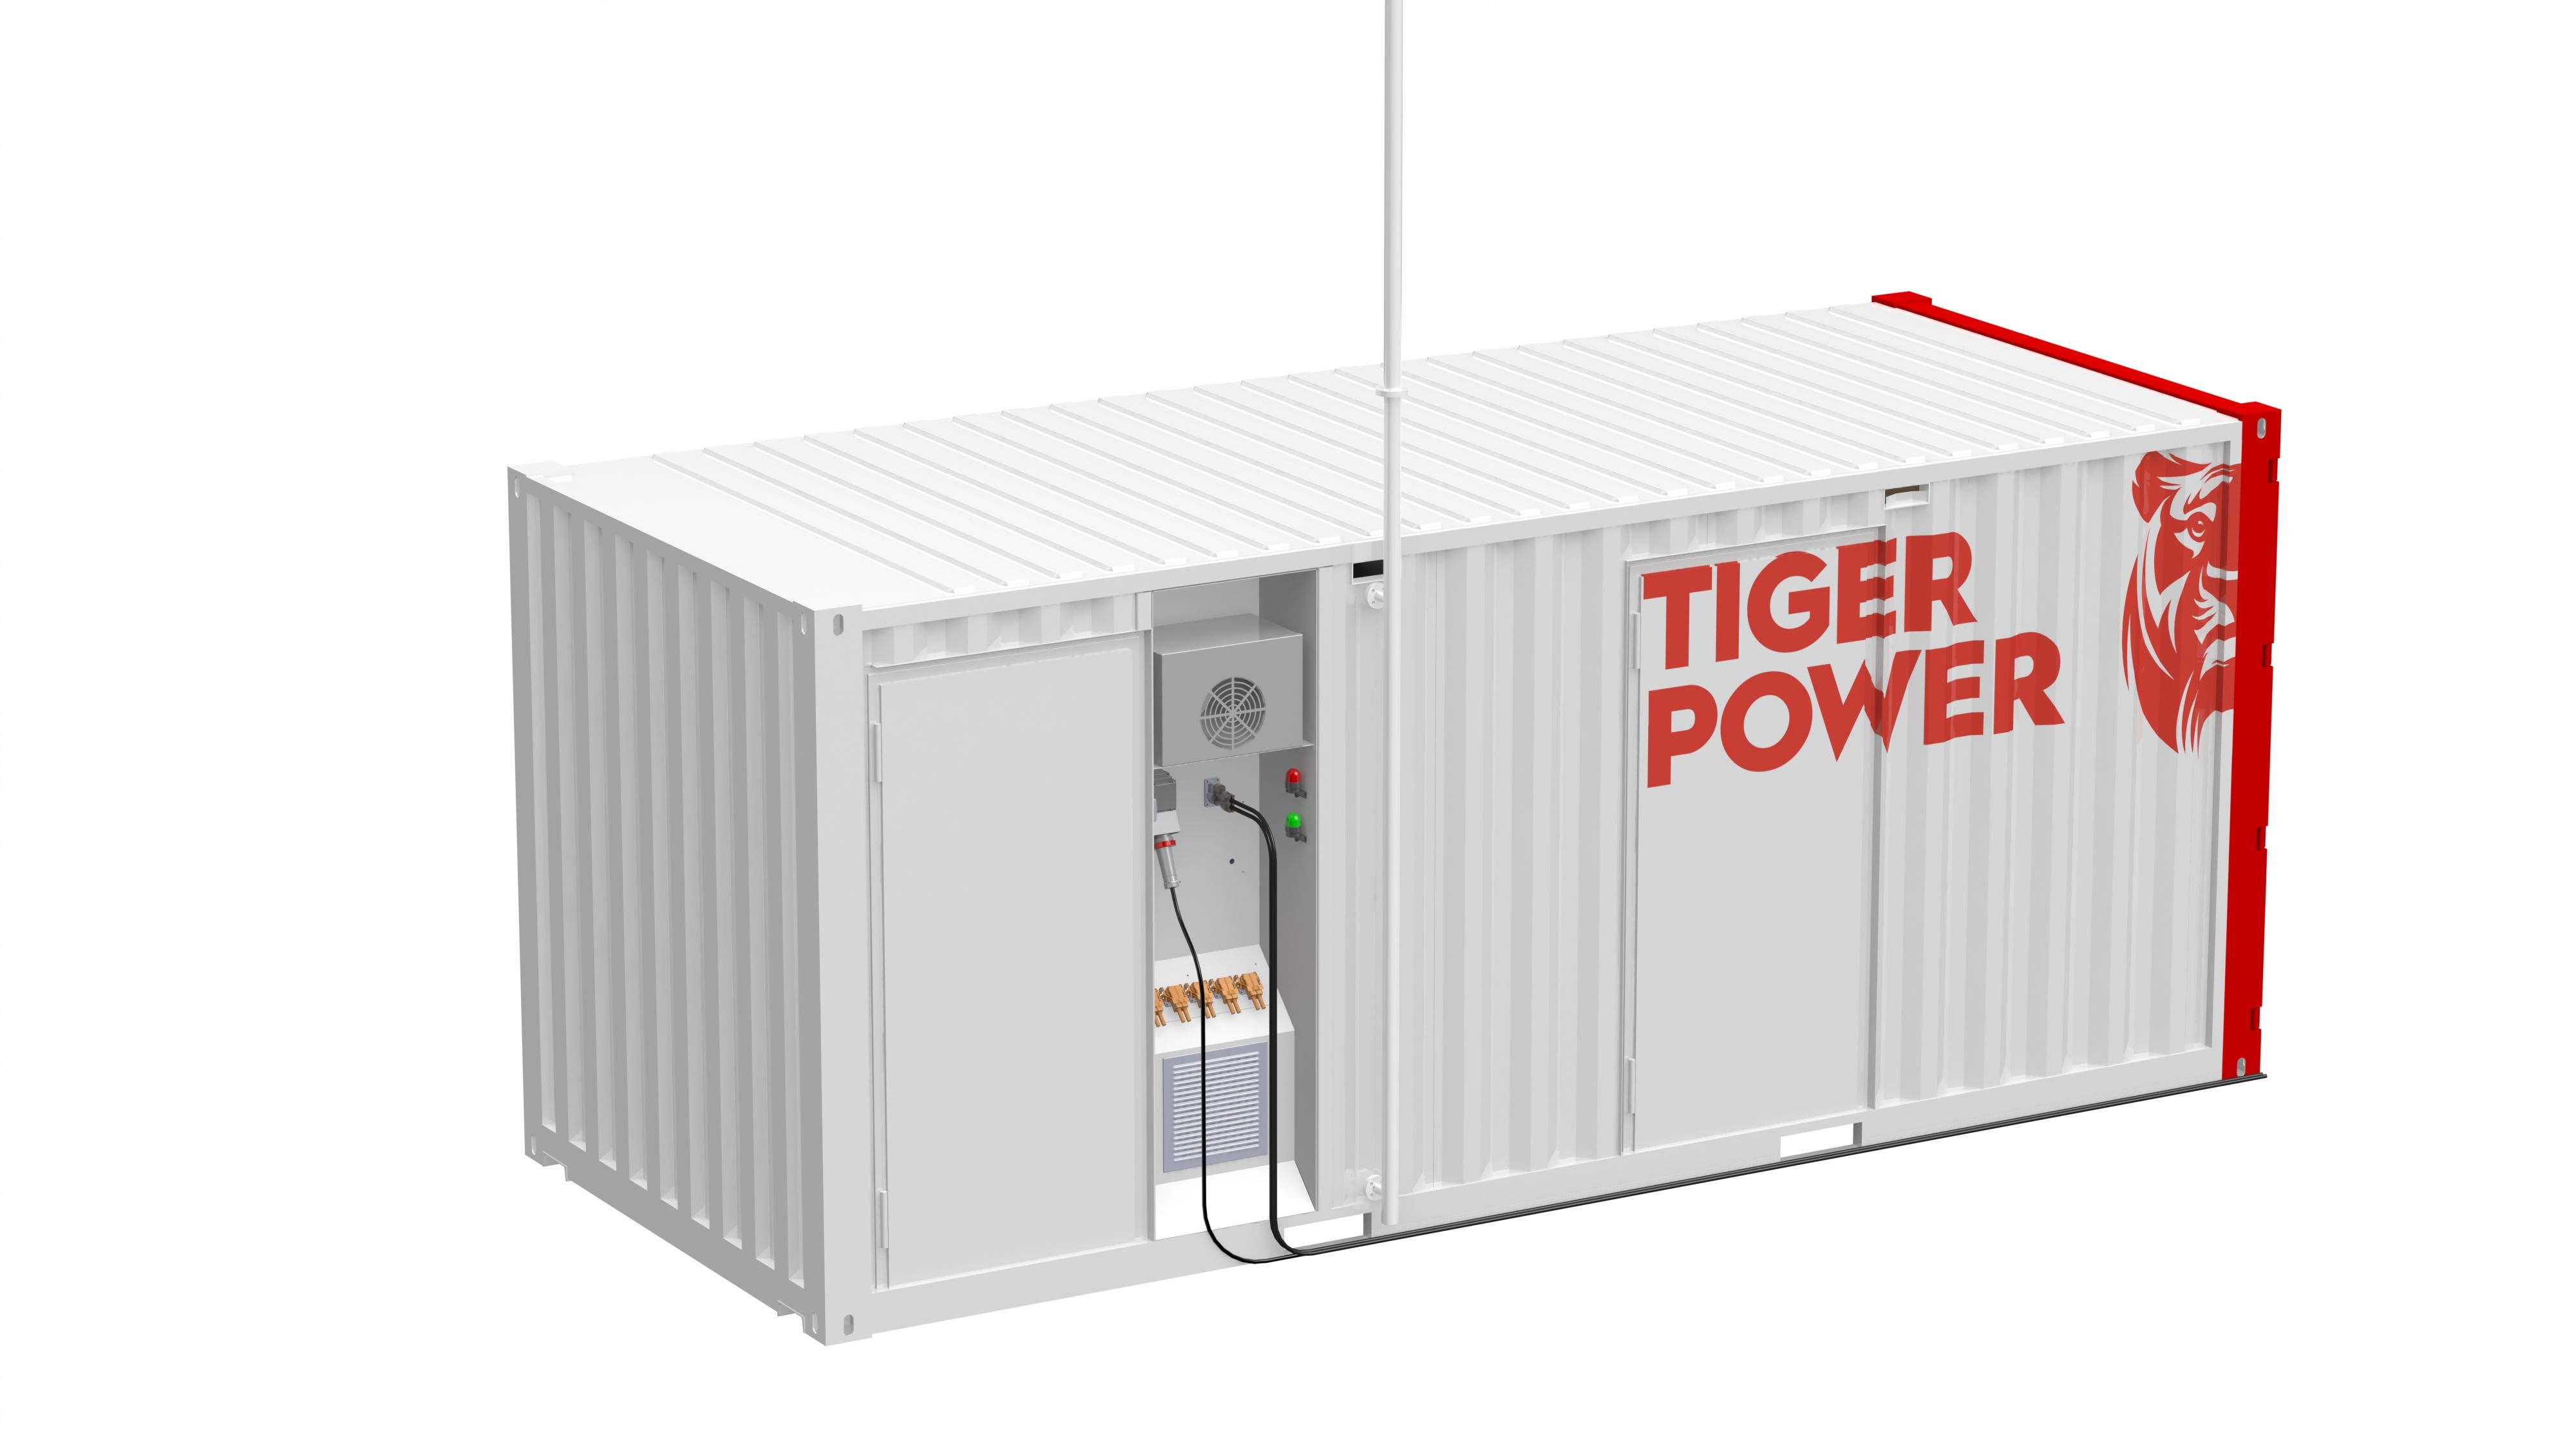 Tiger Power container  © Tiger Power